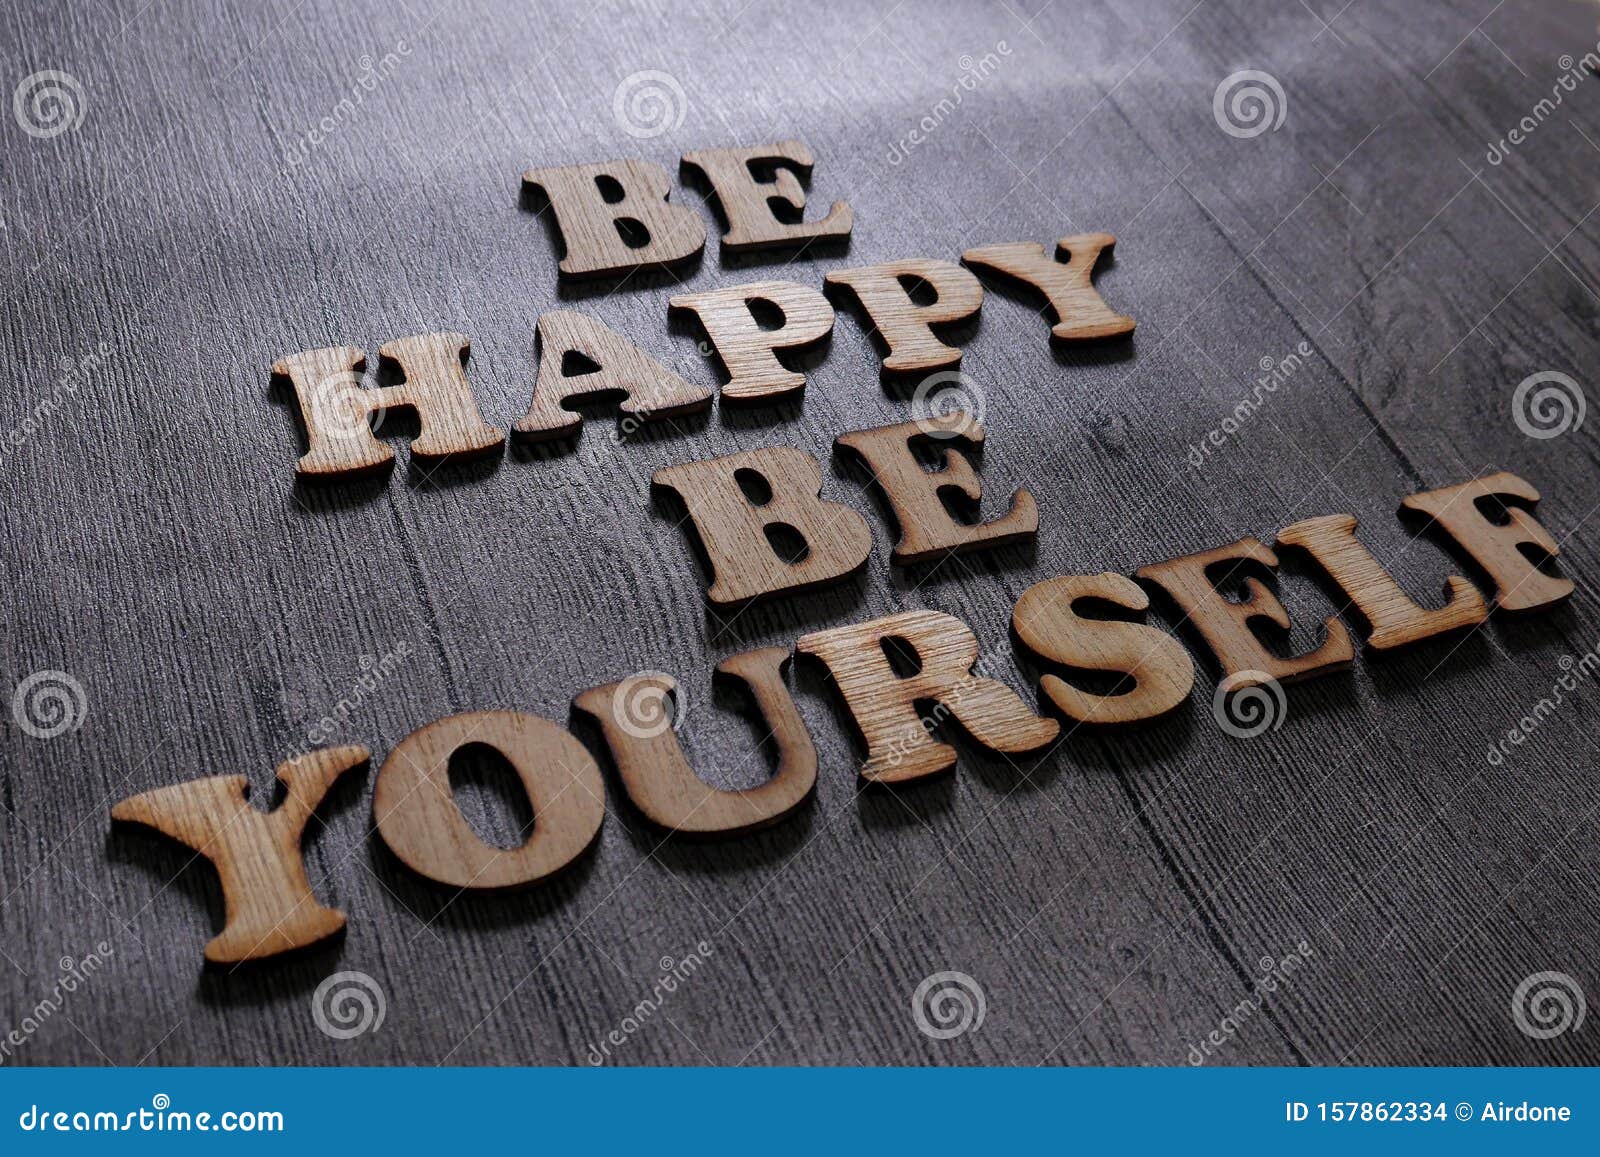 Be Happy Be Yourself, Business Words Quotes Concept Stock Photo ...